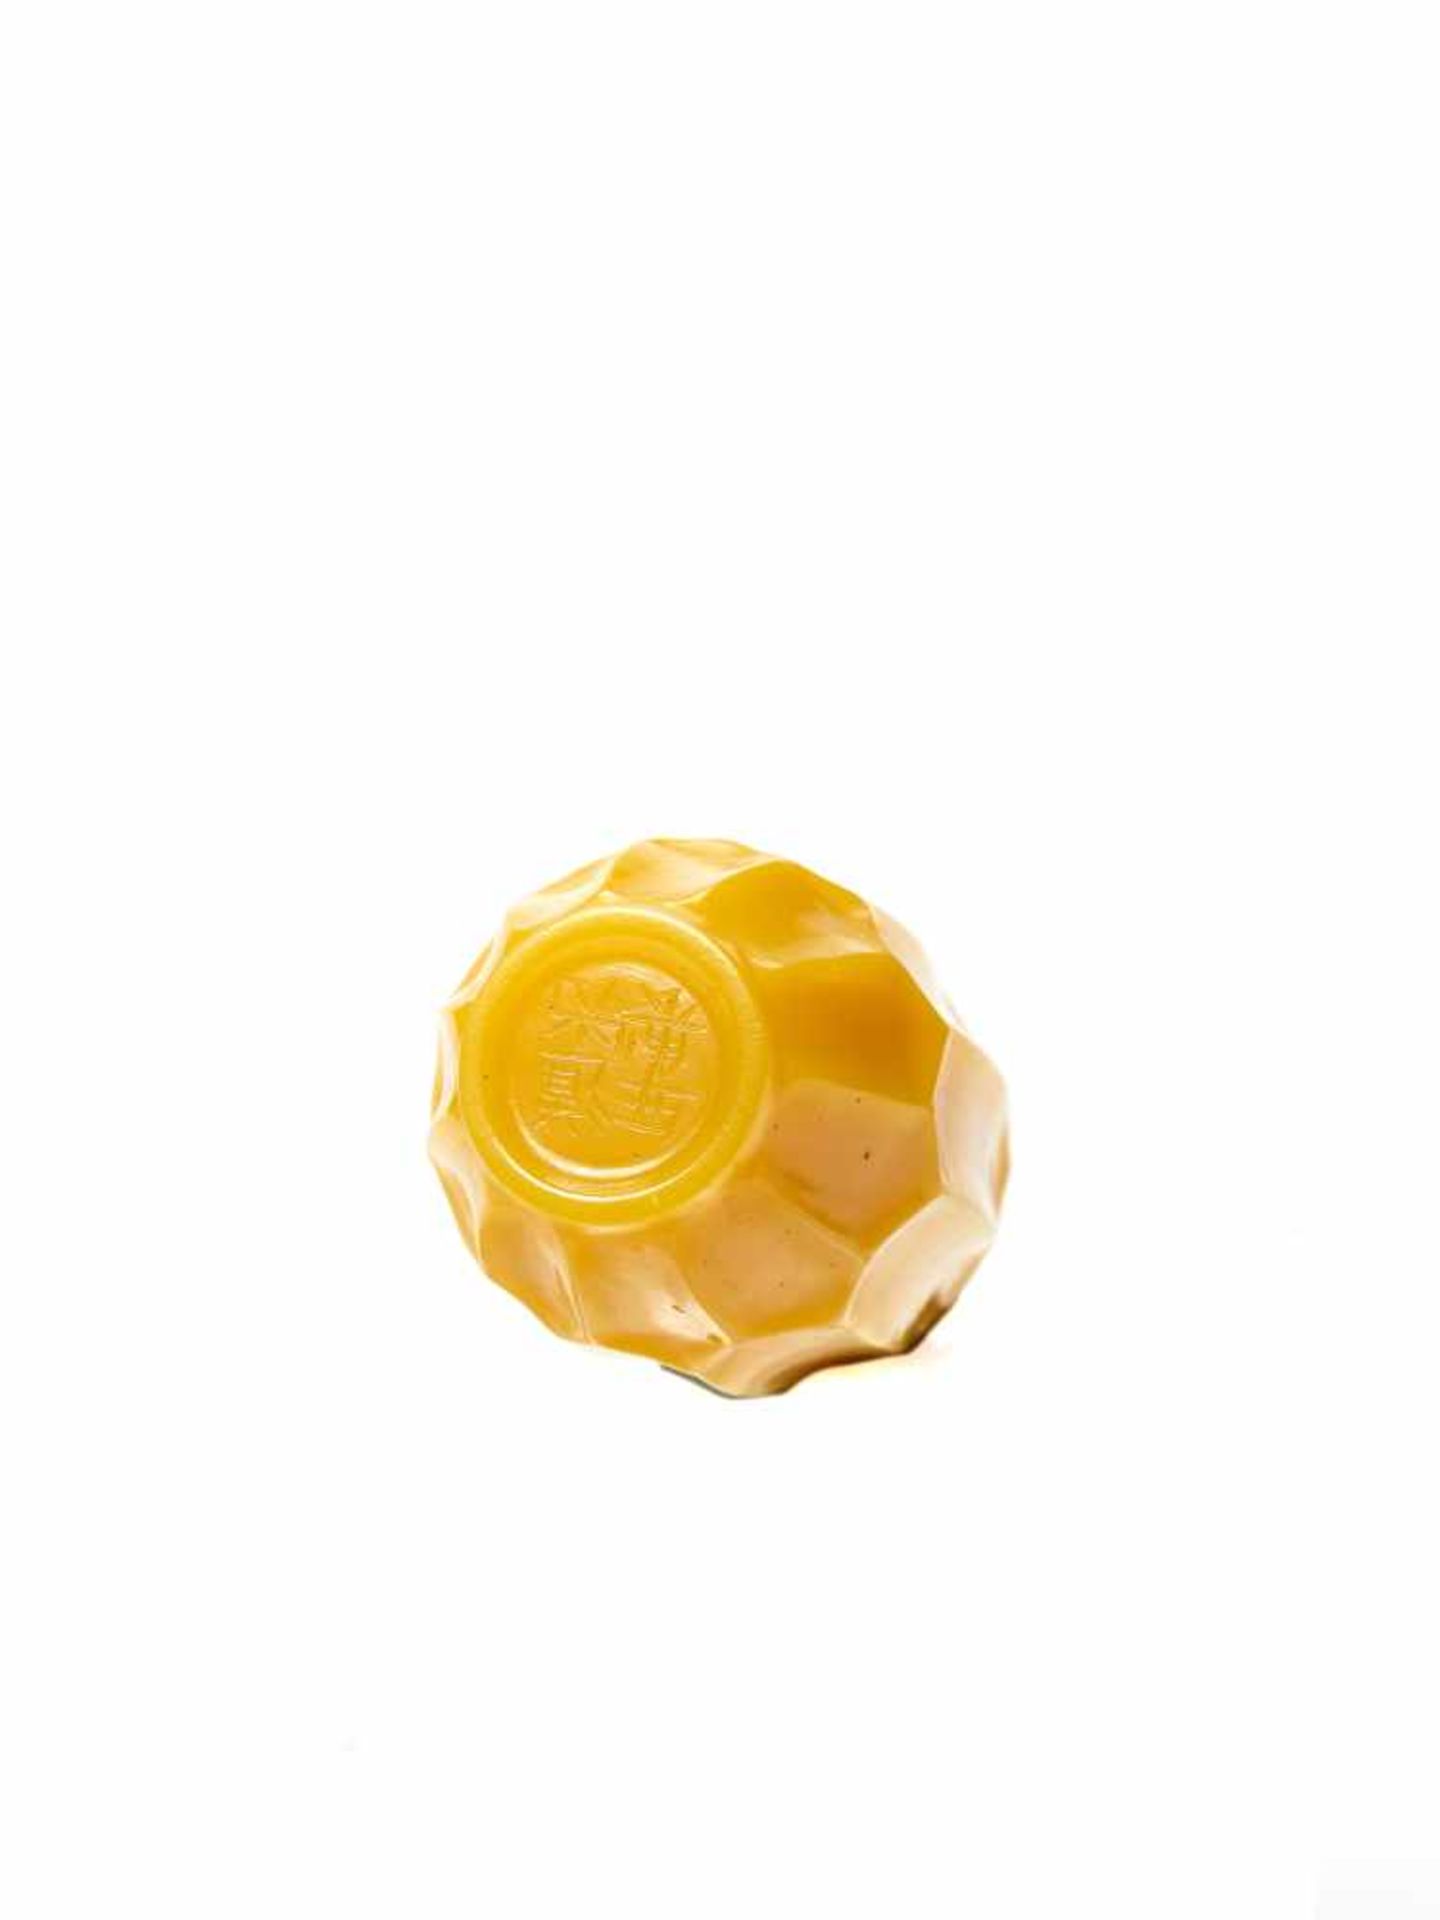 A DAOGUANG MARK AND PERIOD ‘IMPERIAL YELLOW’ FACETED GLASS SNUFF BOTTLEGlassChina, Daoguang mark and - Image 3 of 3